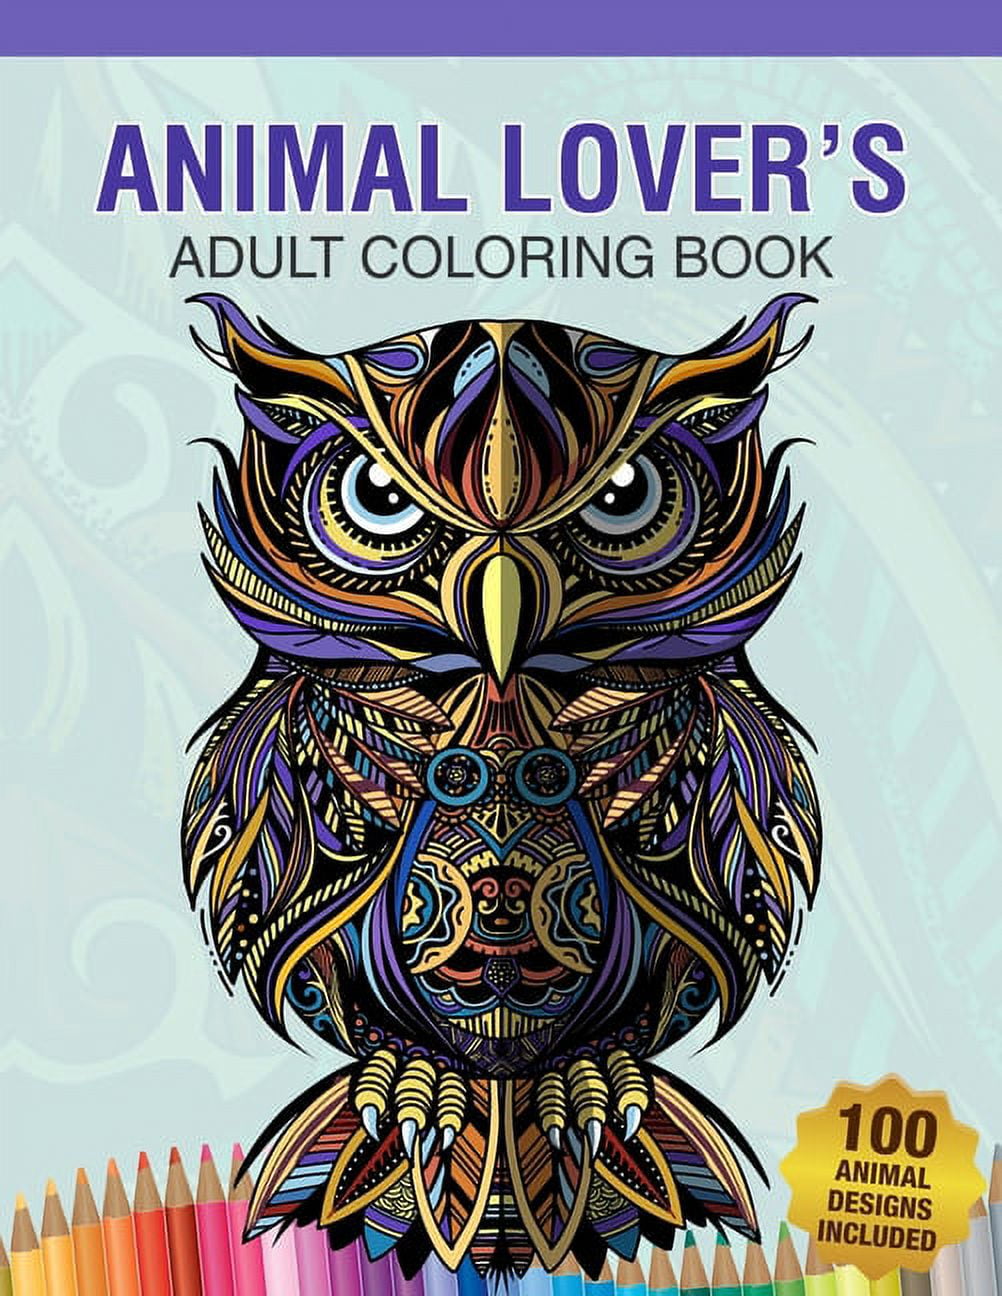 100 Animals Adult Coloring Book: Animal Lovers Coloring Book with 100  Gorgeous Lions, Elephants, Owls, Horses, Dogs, Cats, Plants and Wildlife  for Str (Paperback)